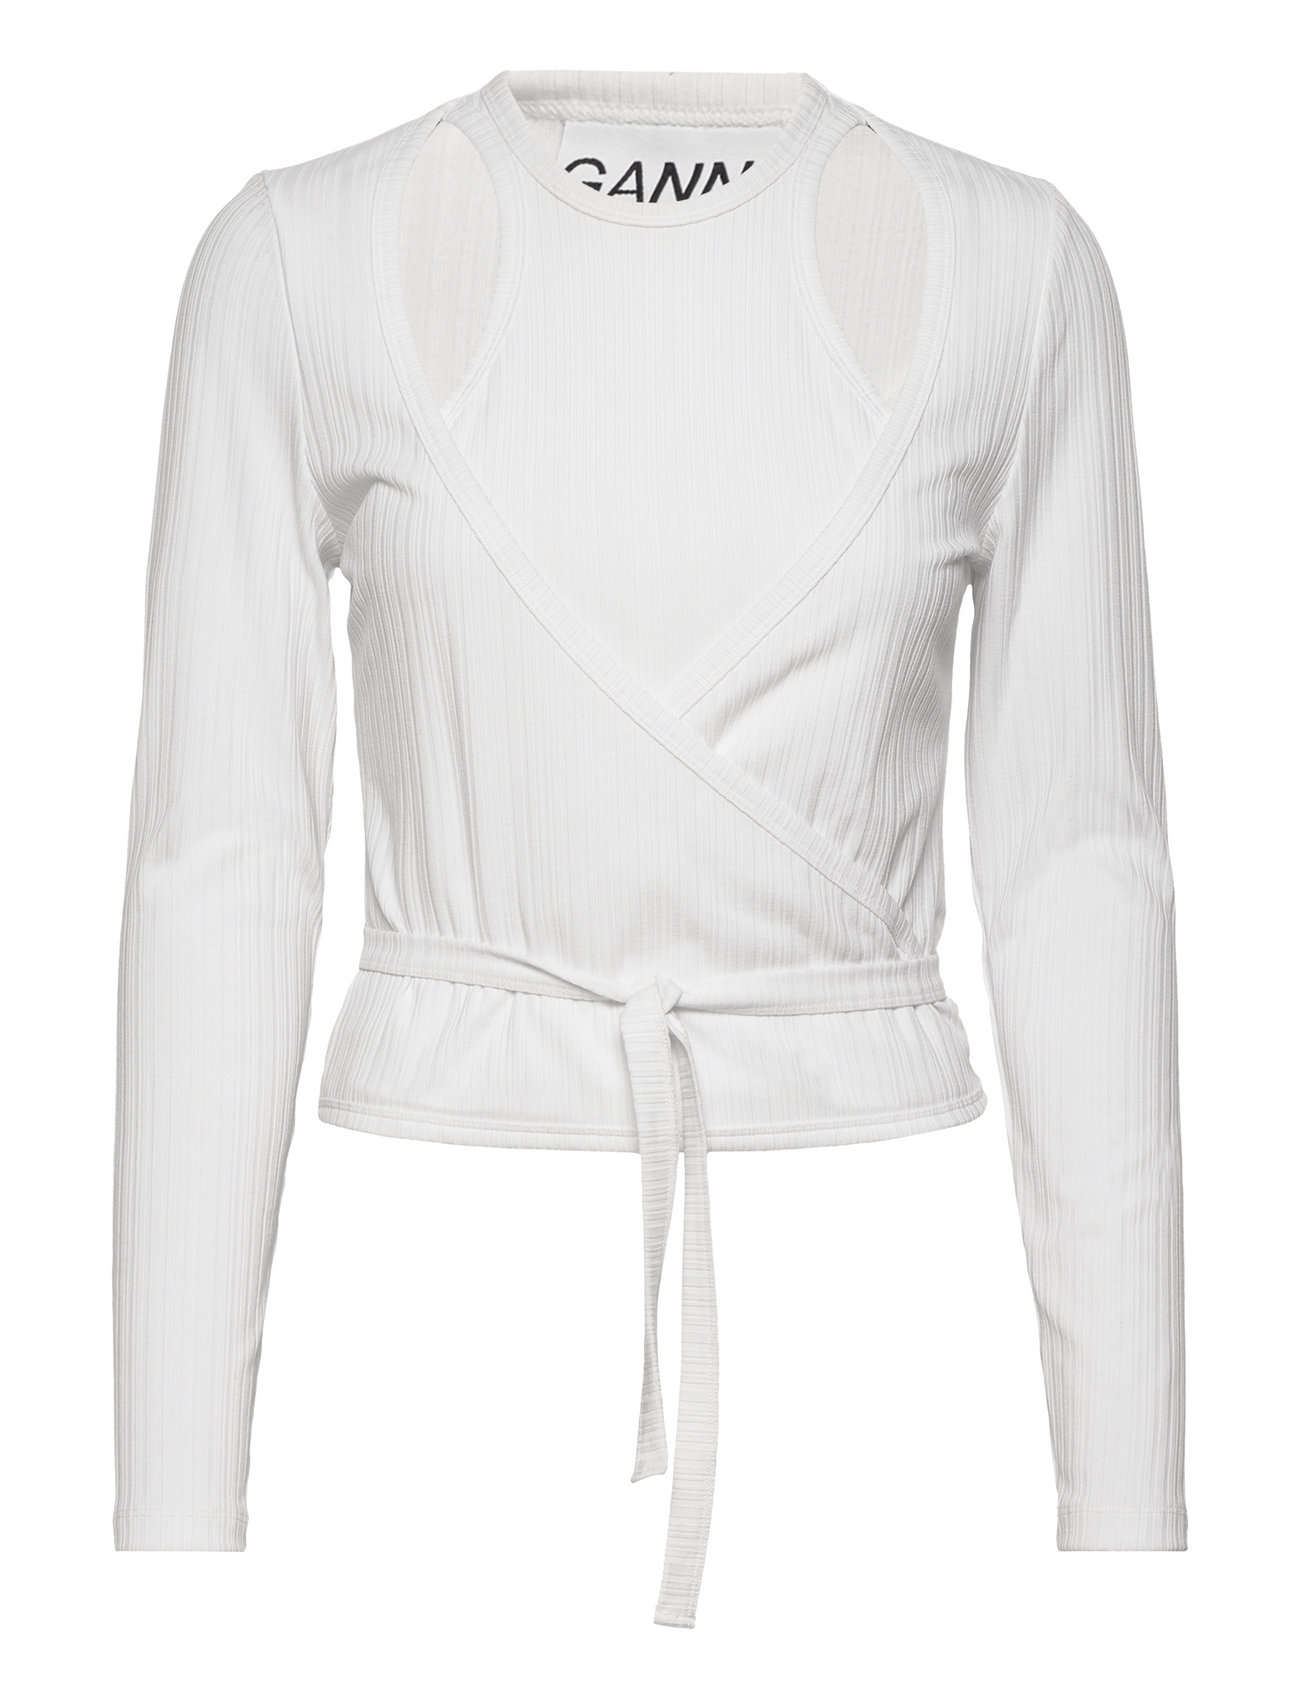 GANNI, Rib Jersey Wrap Blouse, Bright White, Tops - For her